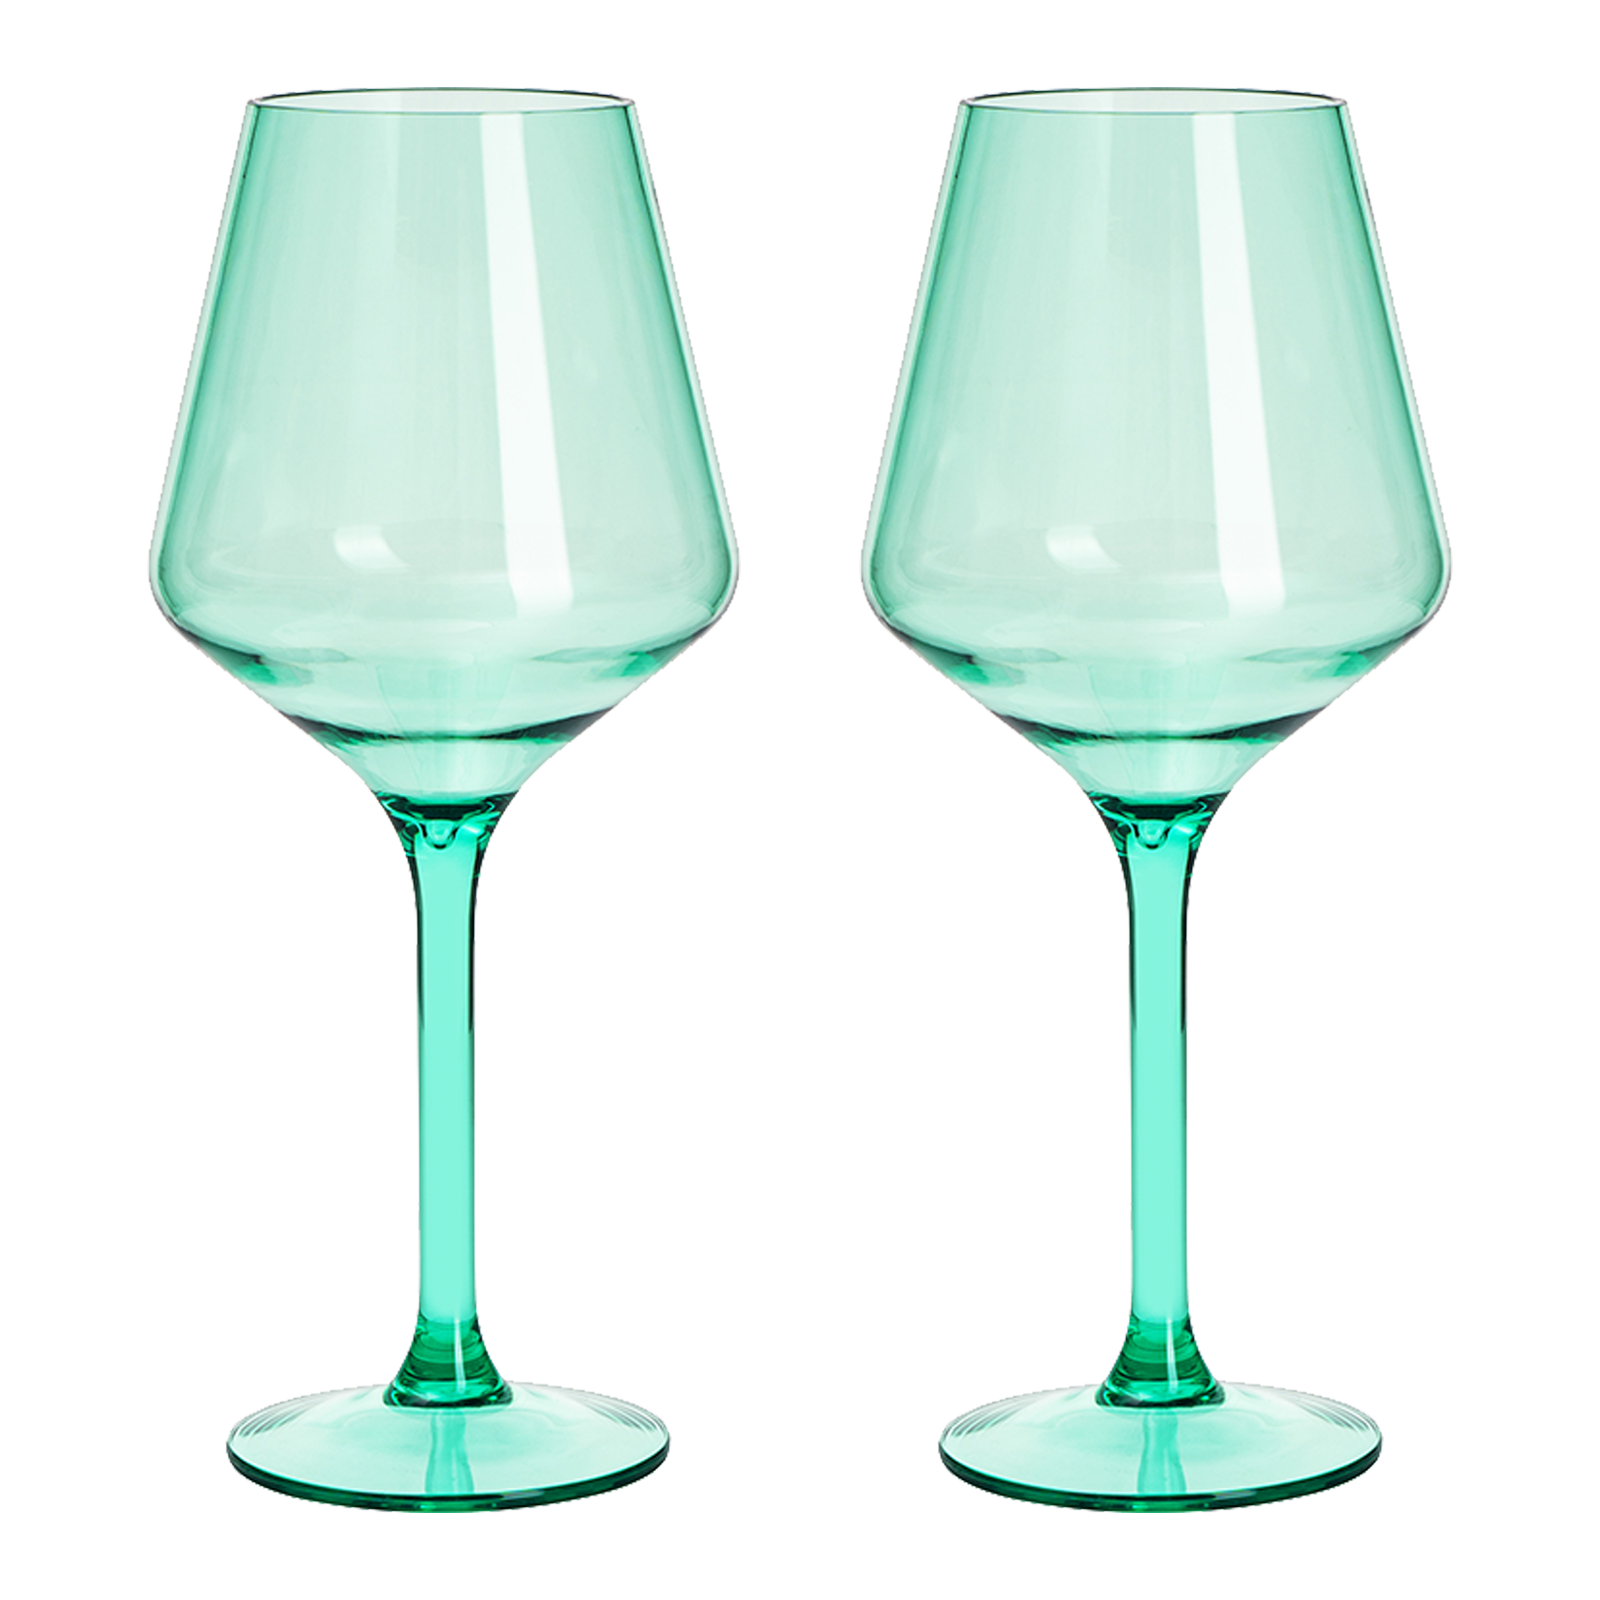  Floating Wine Glasses for Pool (18 Oz, Set of 2) That Float, Shatterproof Poolside Wine Glasses, Floating Cup, Beach Glass